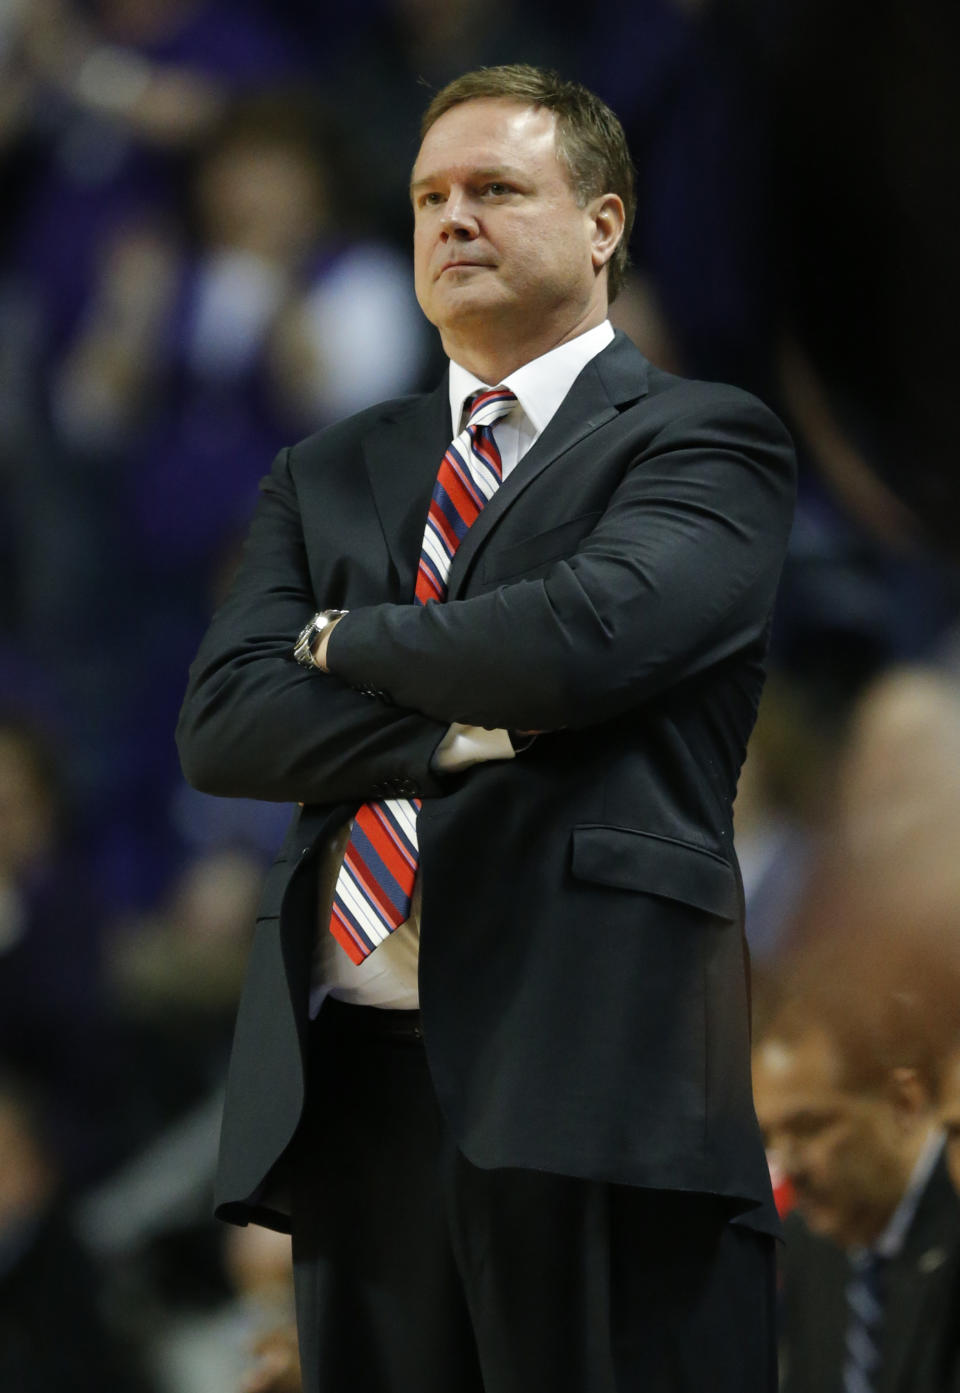 Kansas head coach Bill Self watches his team during the first half of an NCAA college basketball game against Kansas State in Manhattan, Kan., Monday, Feb. 10, 2014. (AP Photo/Orlin Wagner)